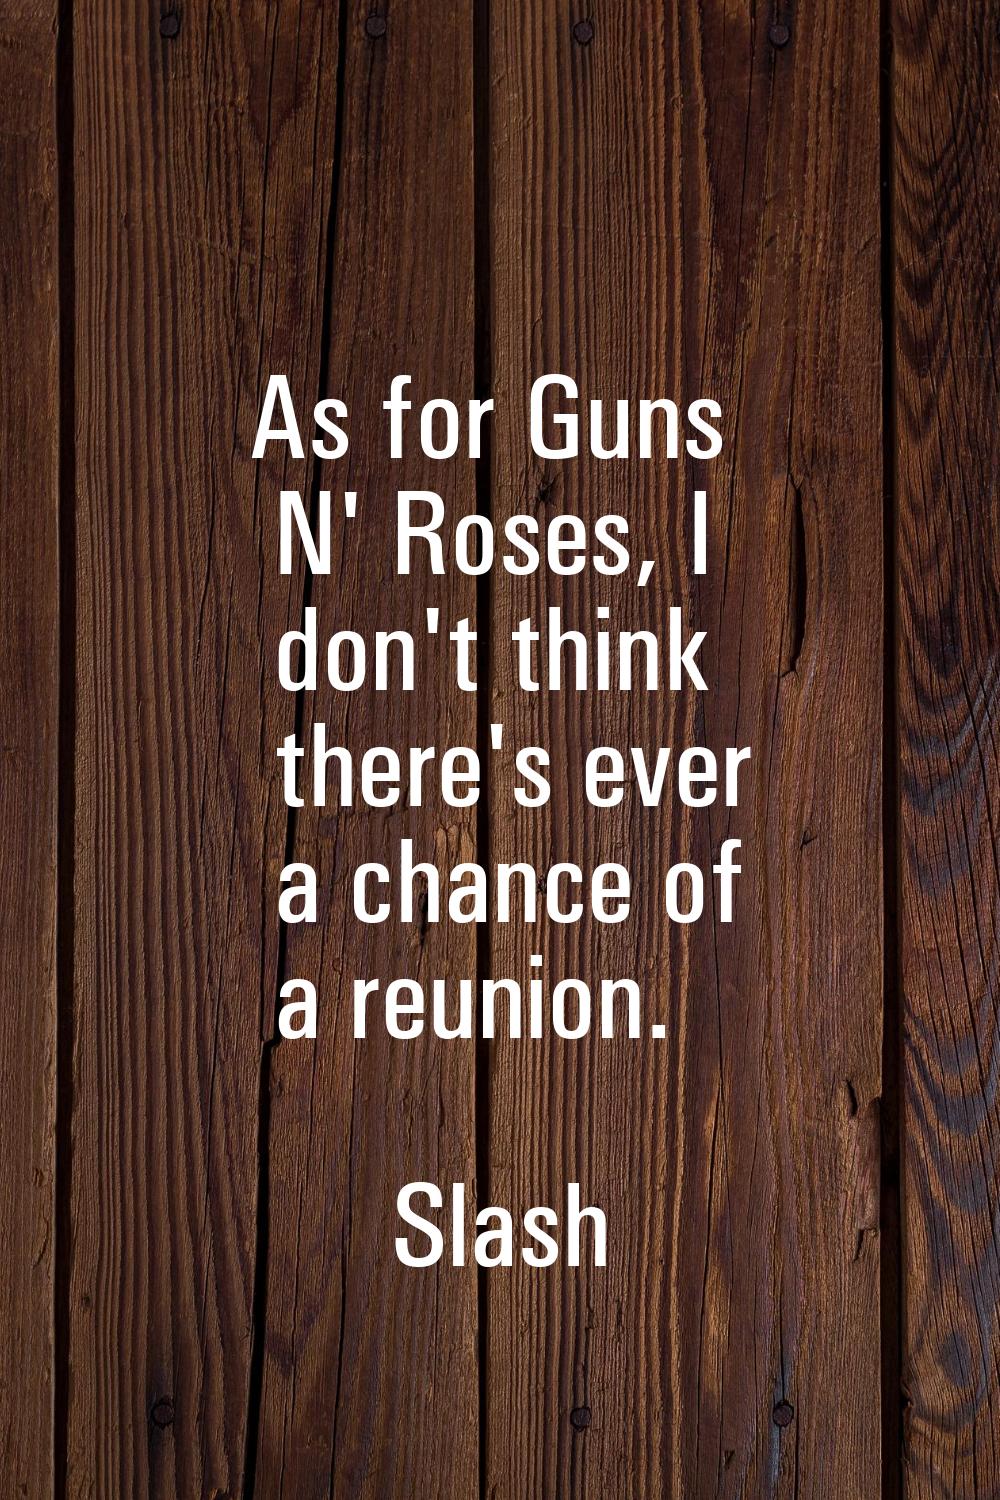 As for Guns N' Roses, I don't think there's ever a chance of a reunion.